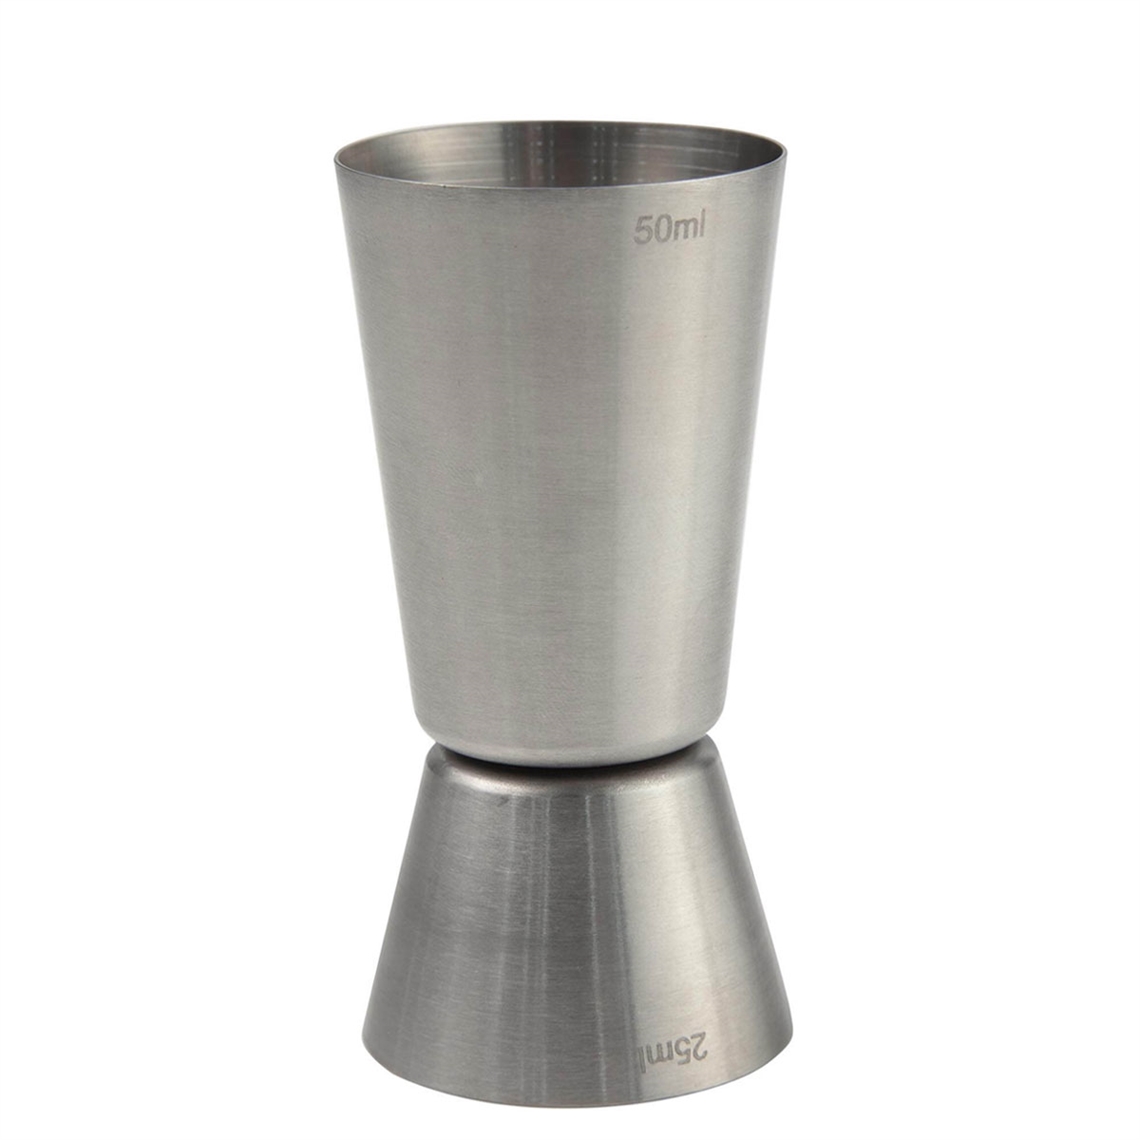 View more fries rack system from our Spirit and Wine Bar Thimble Measures range